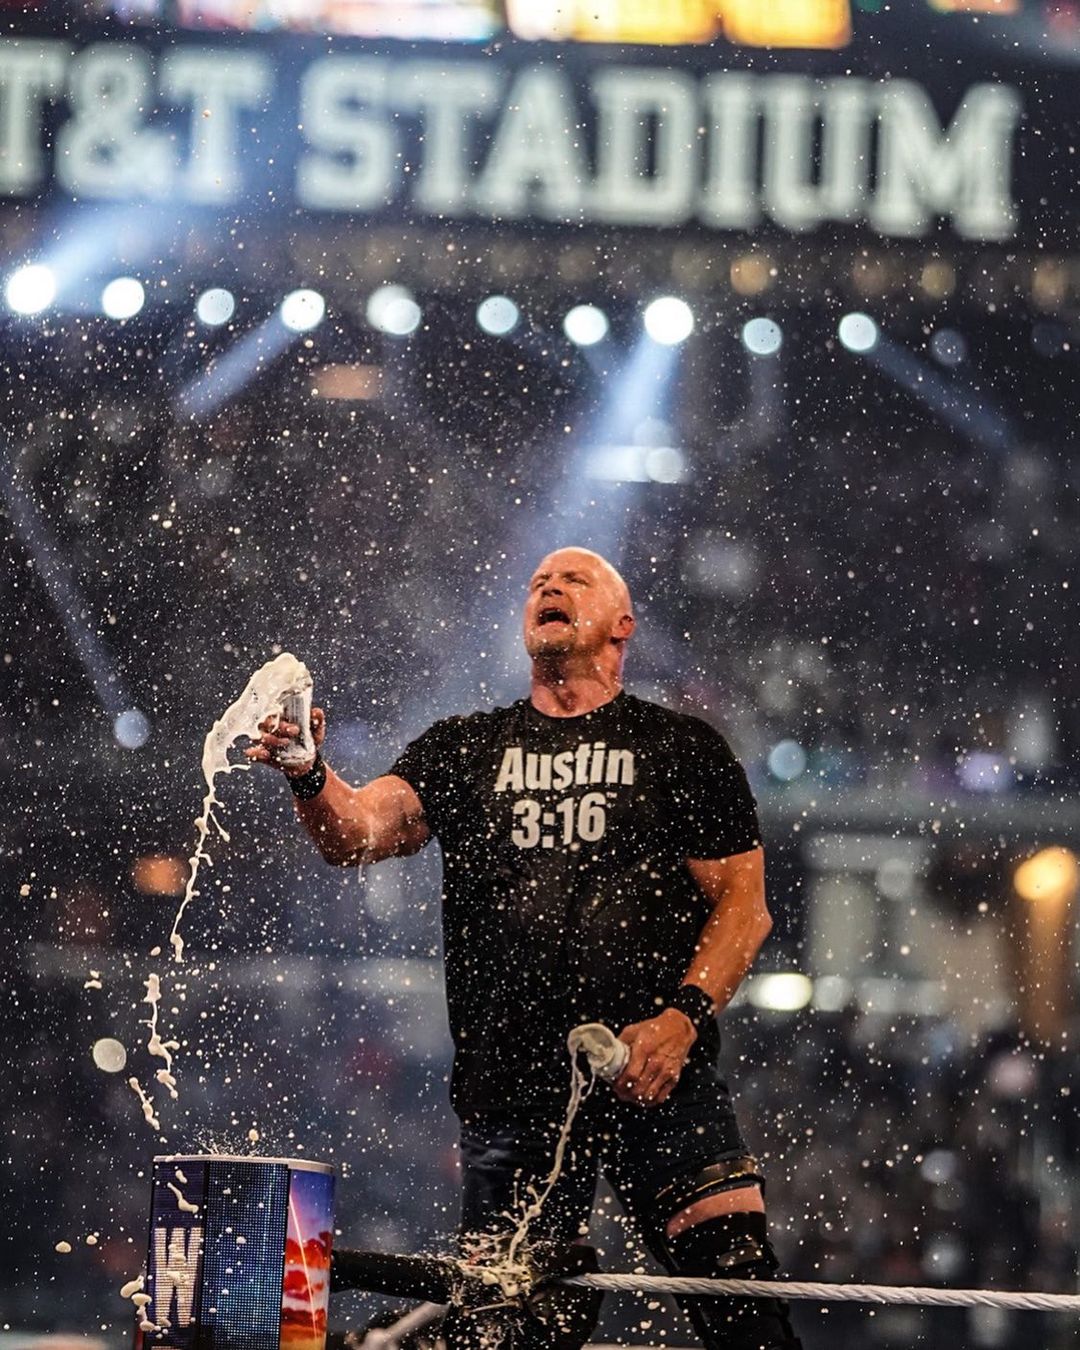 18 Stone Cold And The Rock Wallpapers  WallpaperSafari